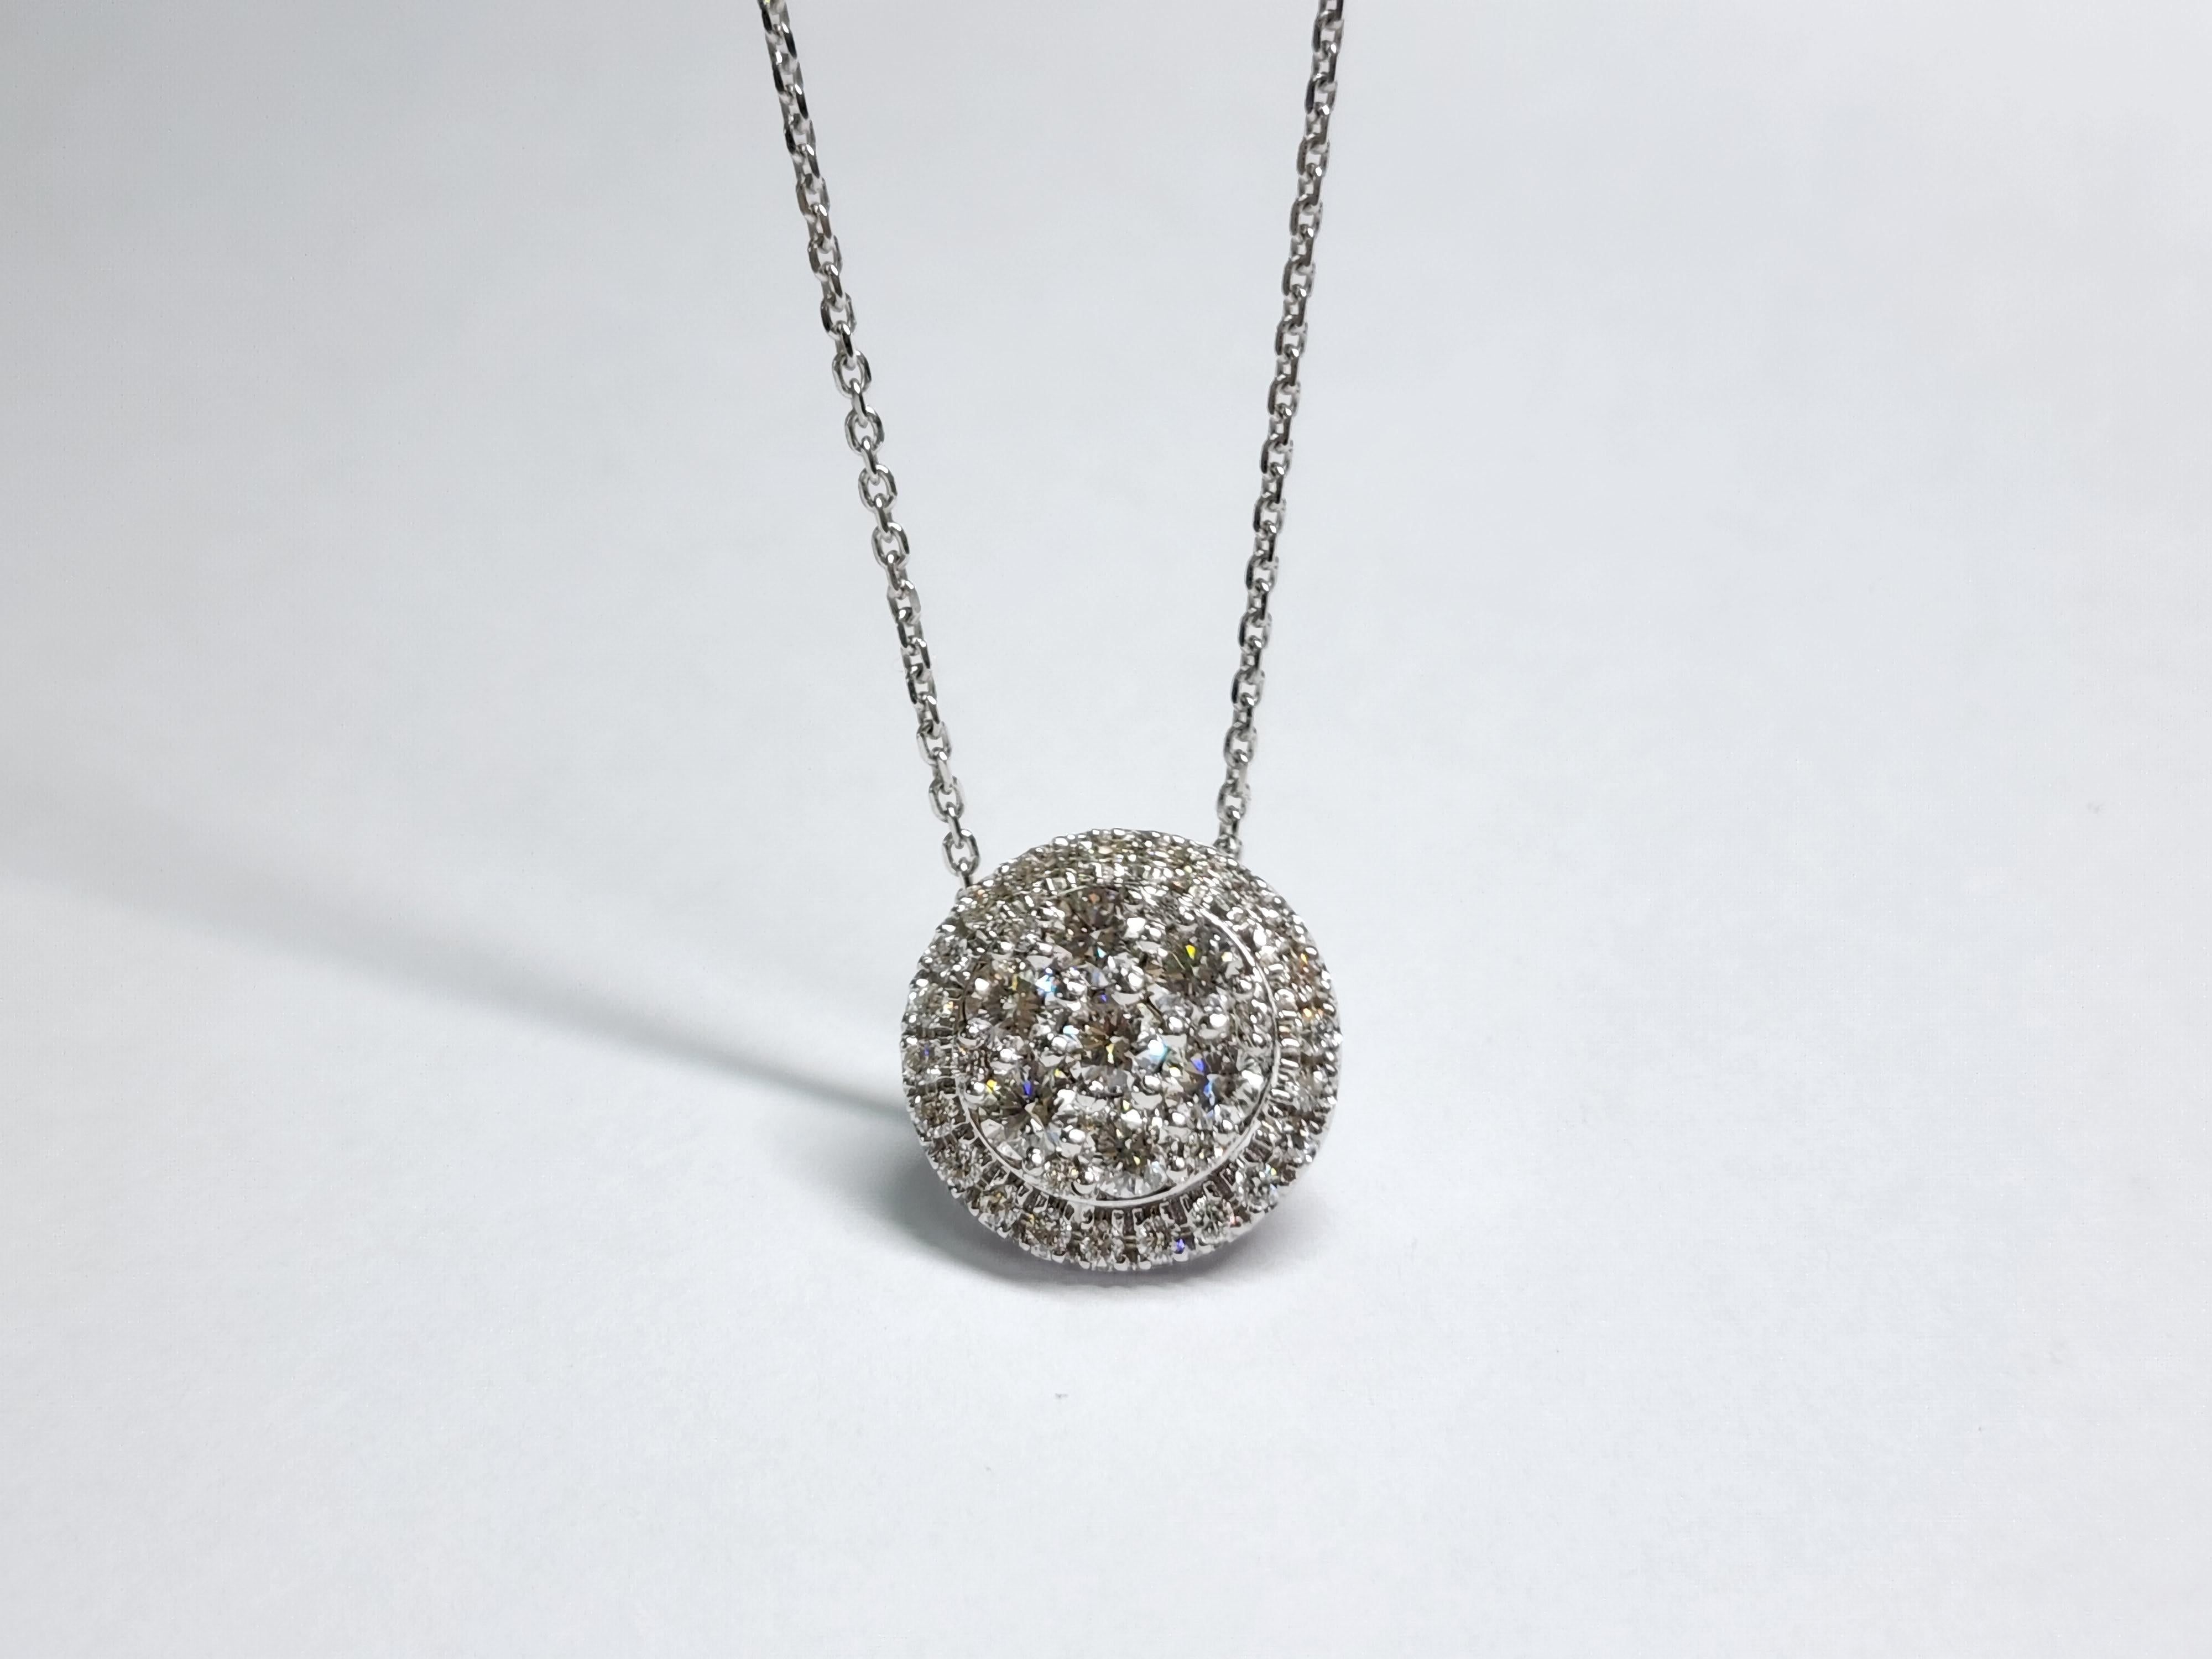 Title: [Necklace Name] - Exquisite 0.80CT Diamonds Big Pendant Necklace in [Gold Karat] Gold

Product Description:

Introducing our Diamonds Neacklace, a grand statement of luxury and sophistication. This remarkable necklace features a big pendant